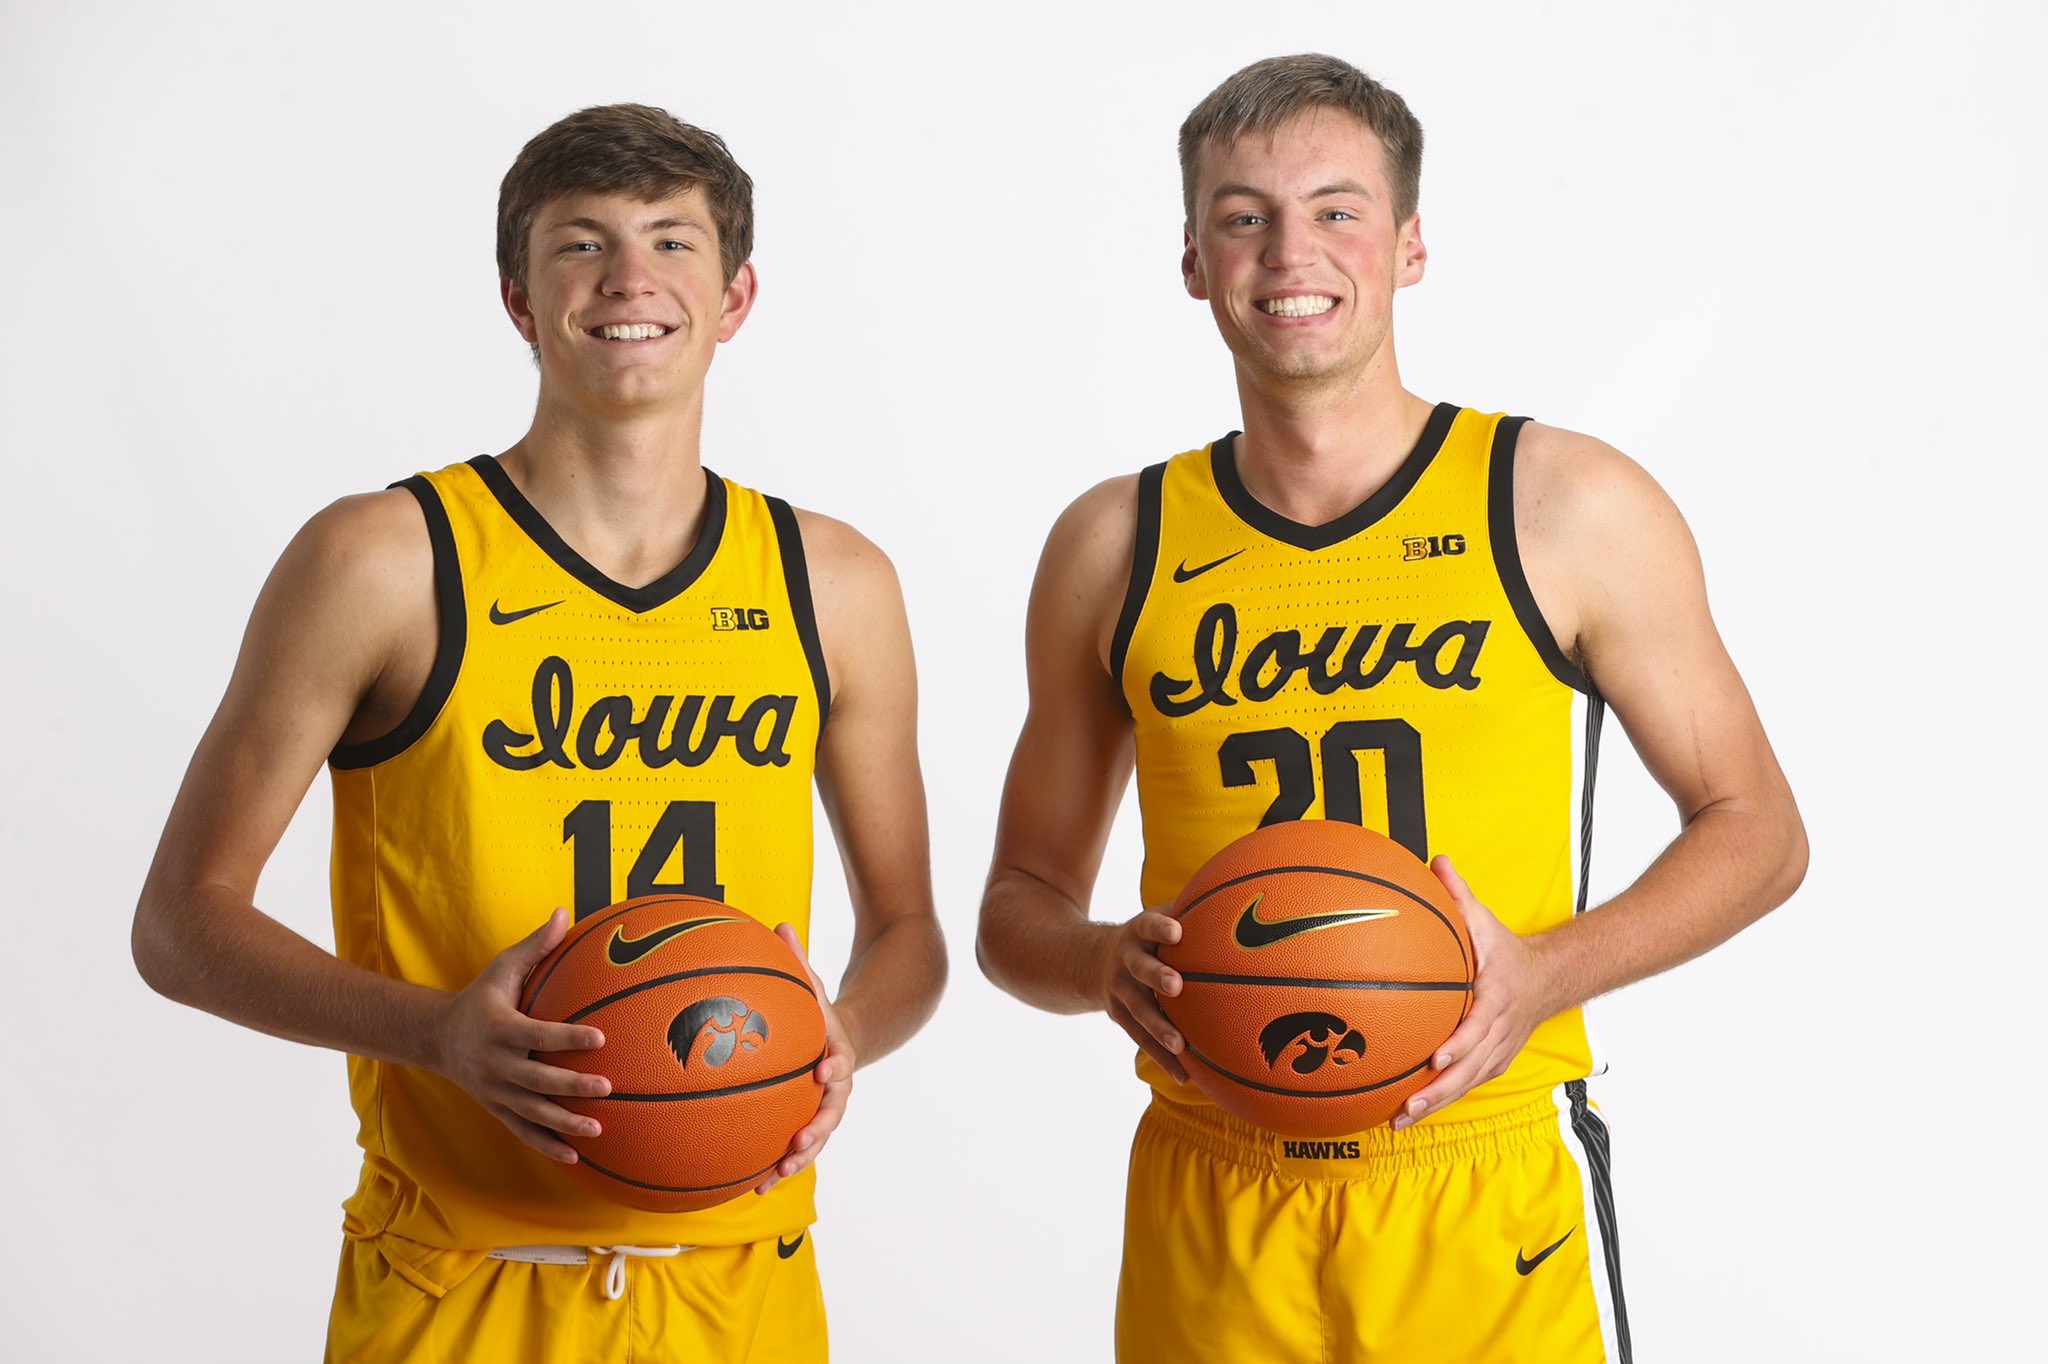 Brotherly love and toughness will continue with Iowa men's basketball Hawk Fanatic